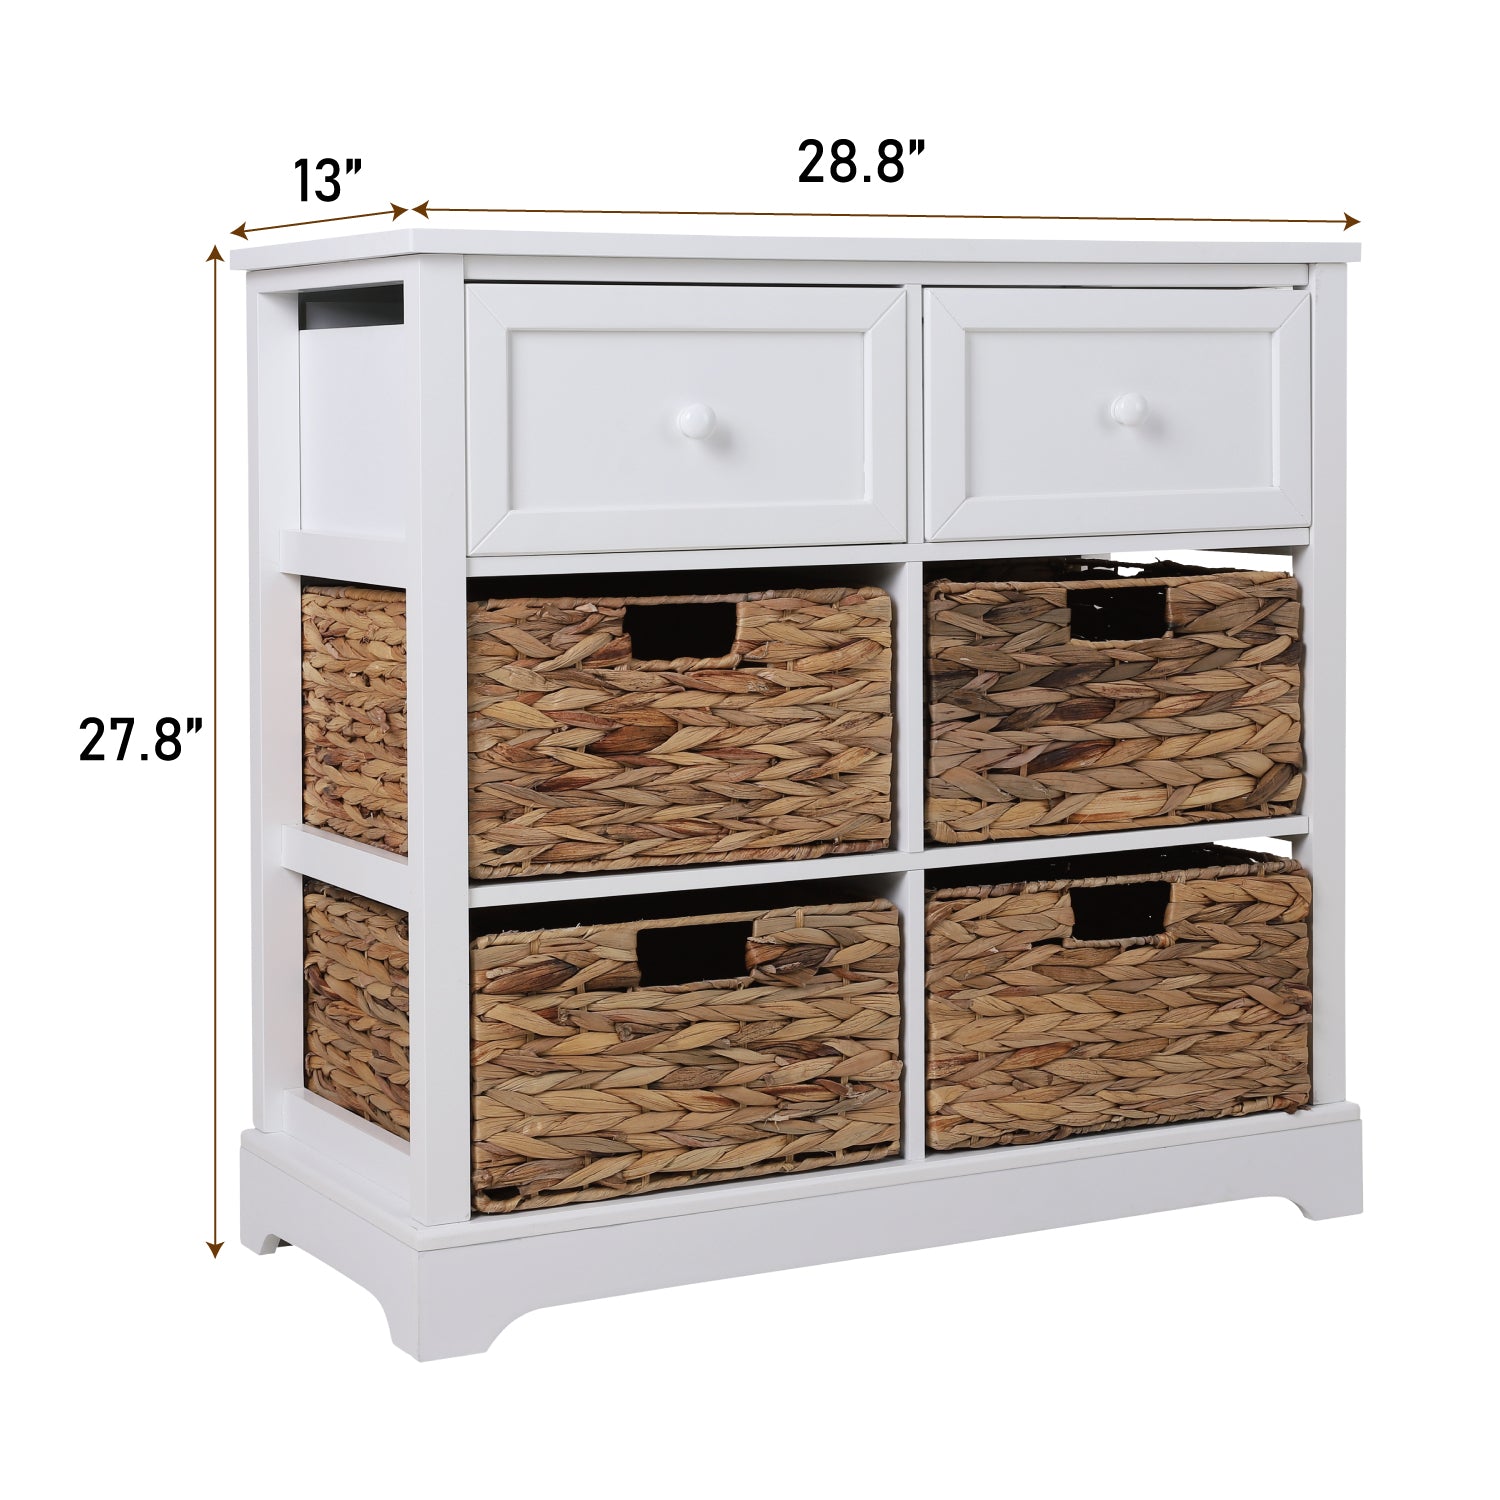 Sophia & William Decorative Storage Cabinet with Removable Water Hyacinth Woven Baskets for Living Room